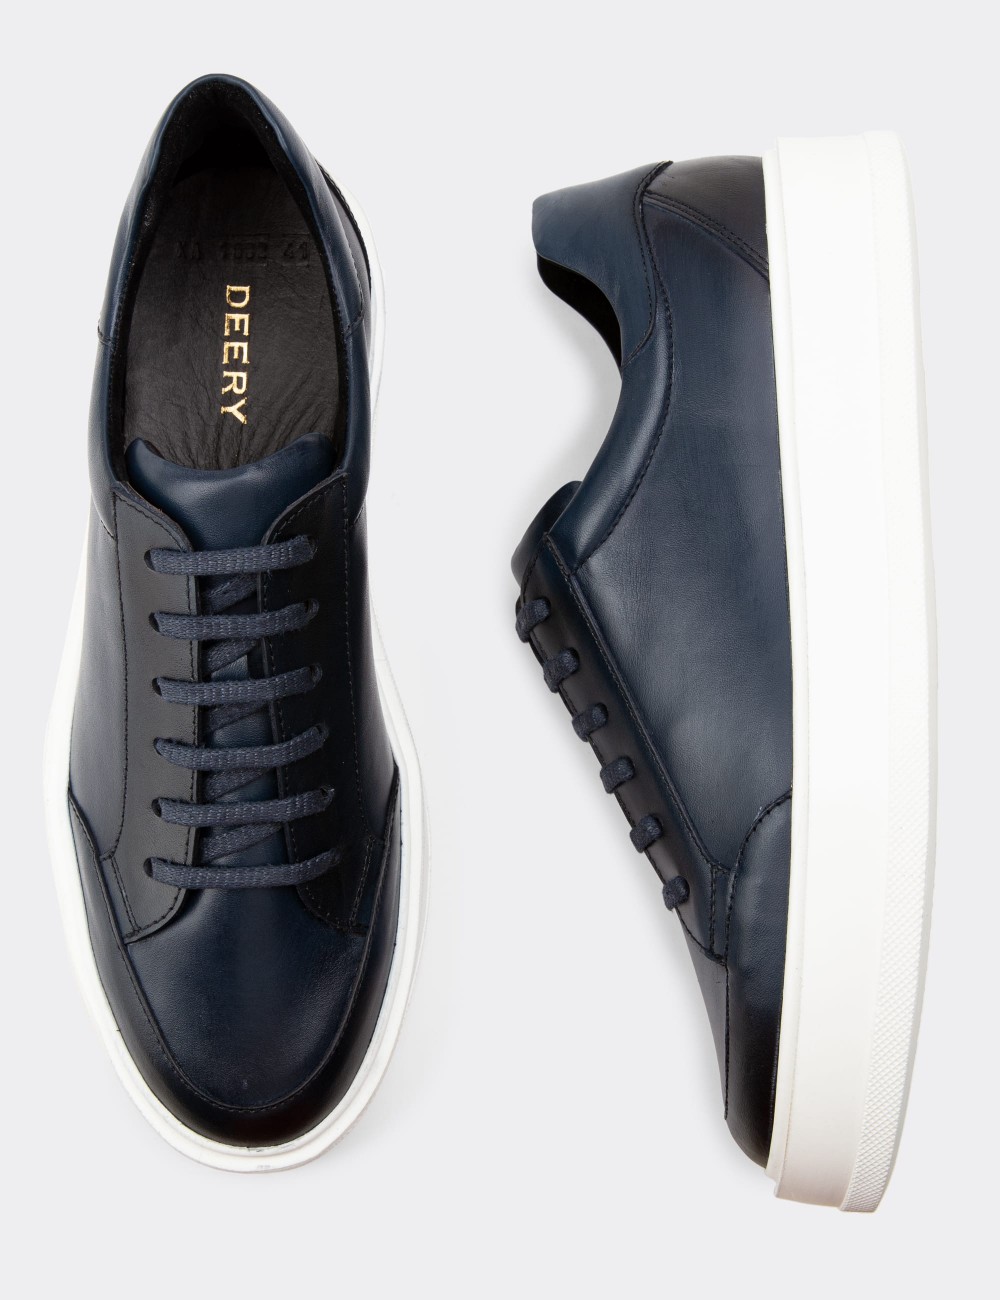 Navy Leather Sneakers - 01882MLCVP01